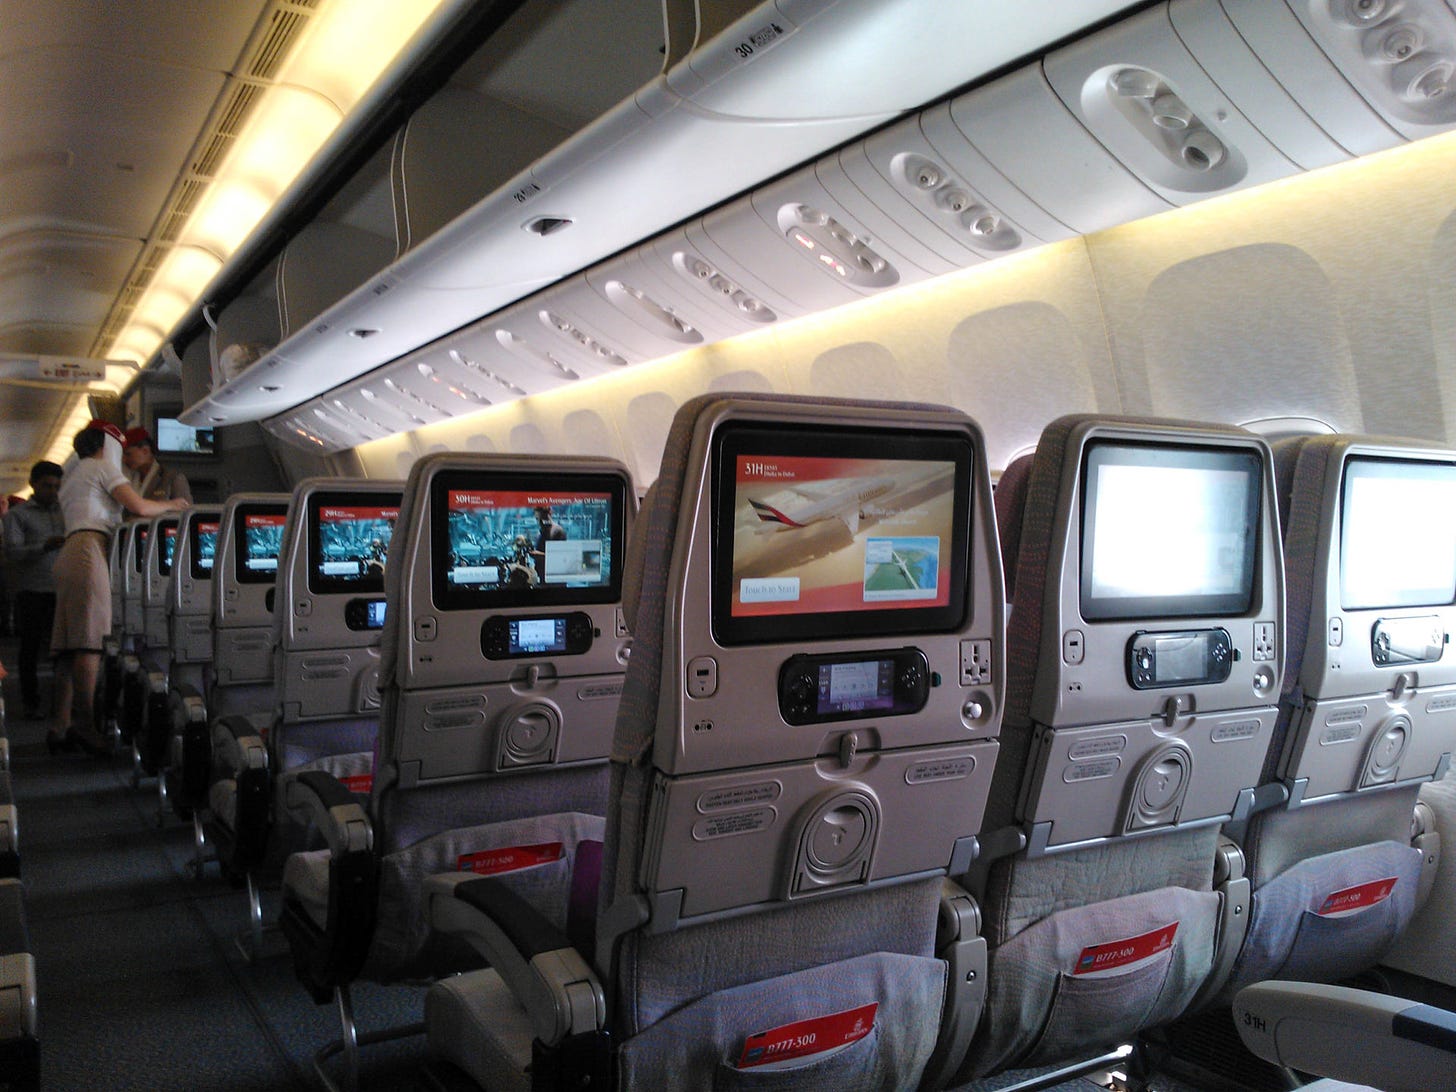 Seat classes in aircraft - Economy